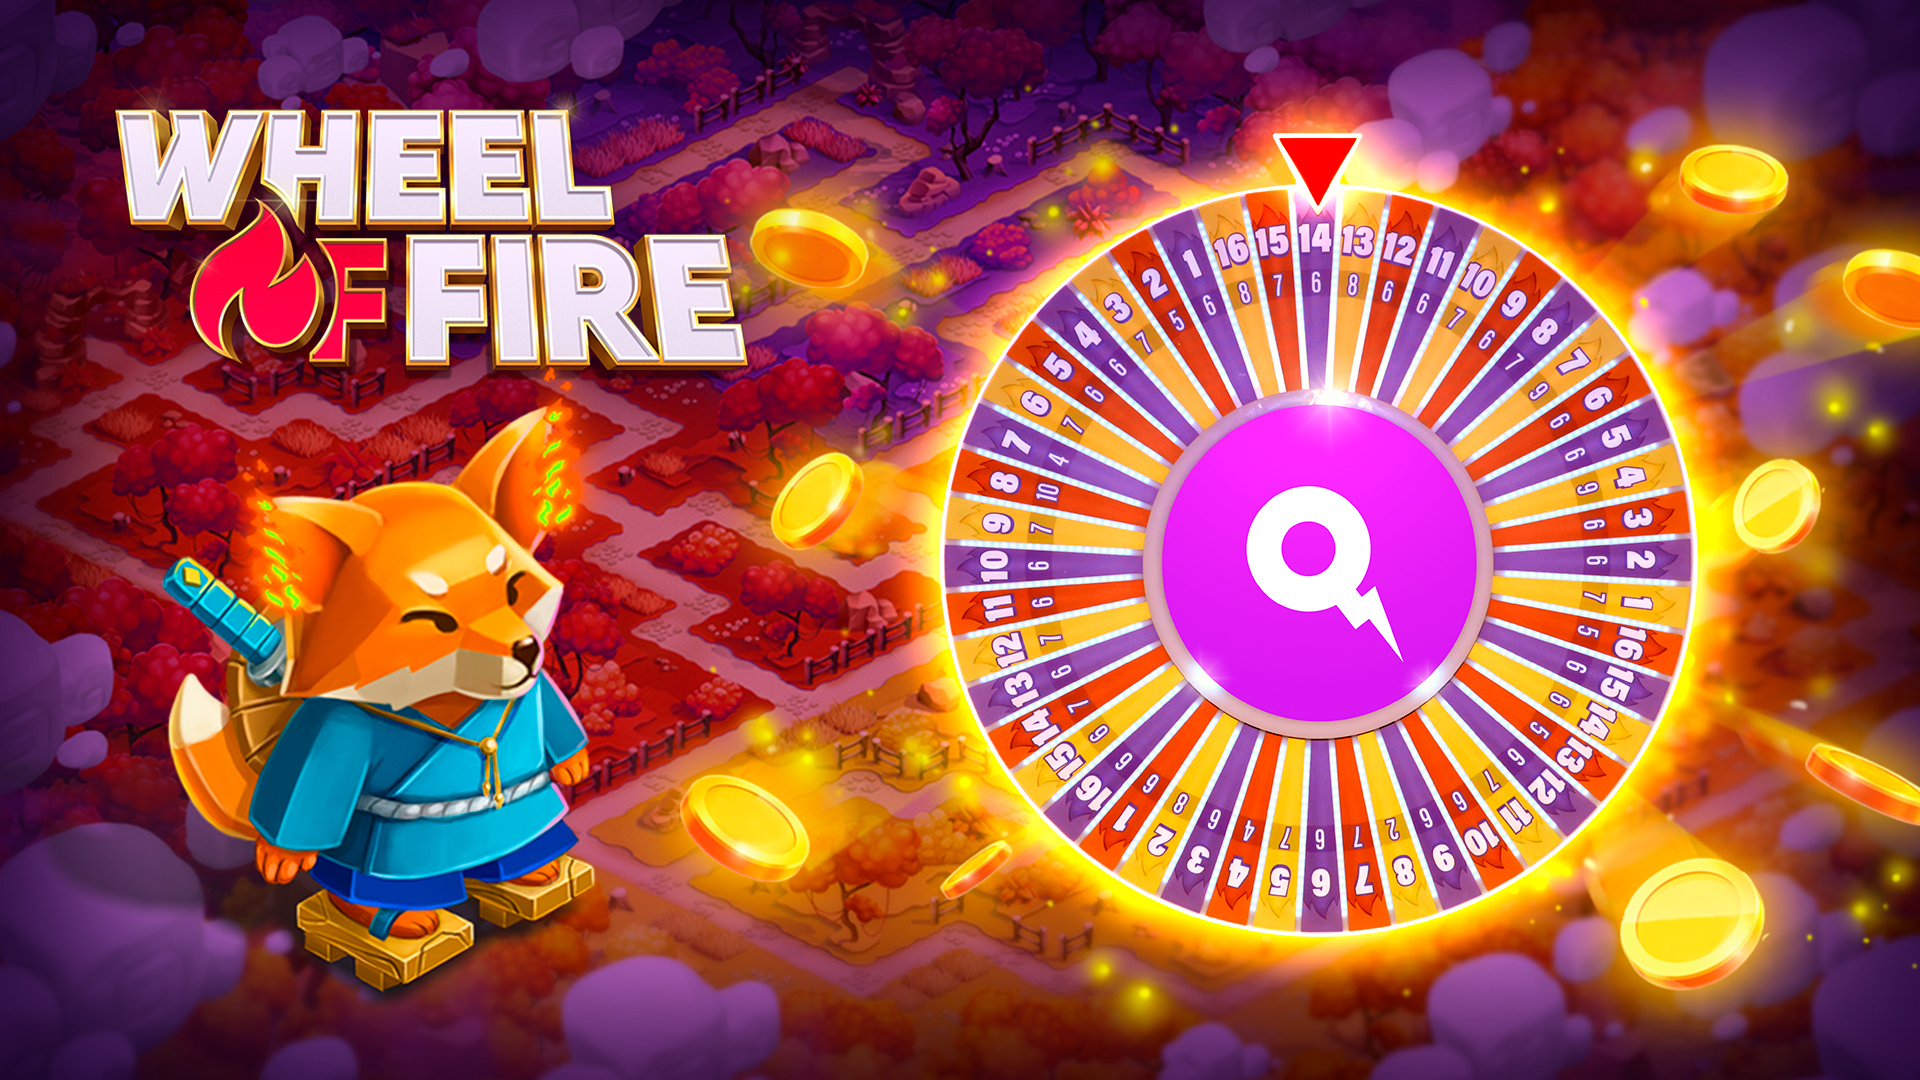 Quik turns up the heat with the release of Wheel of Fire: Live & Single Player